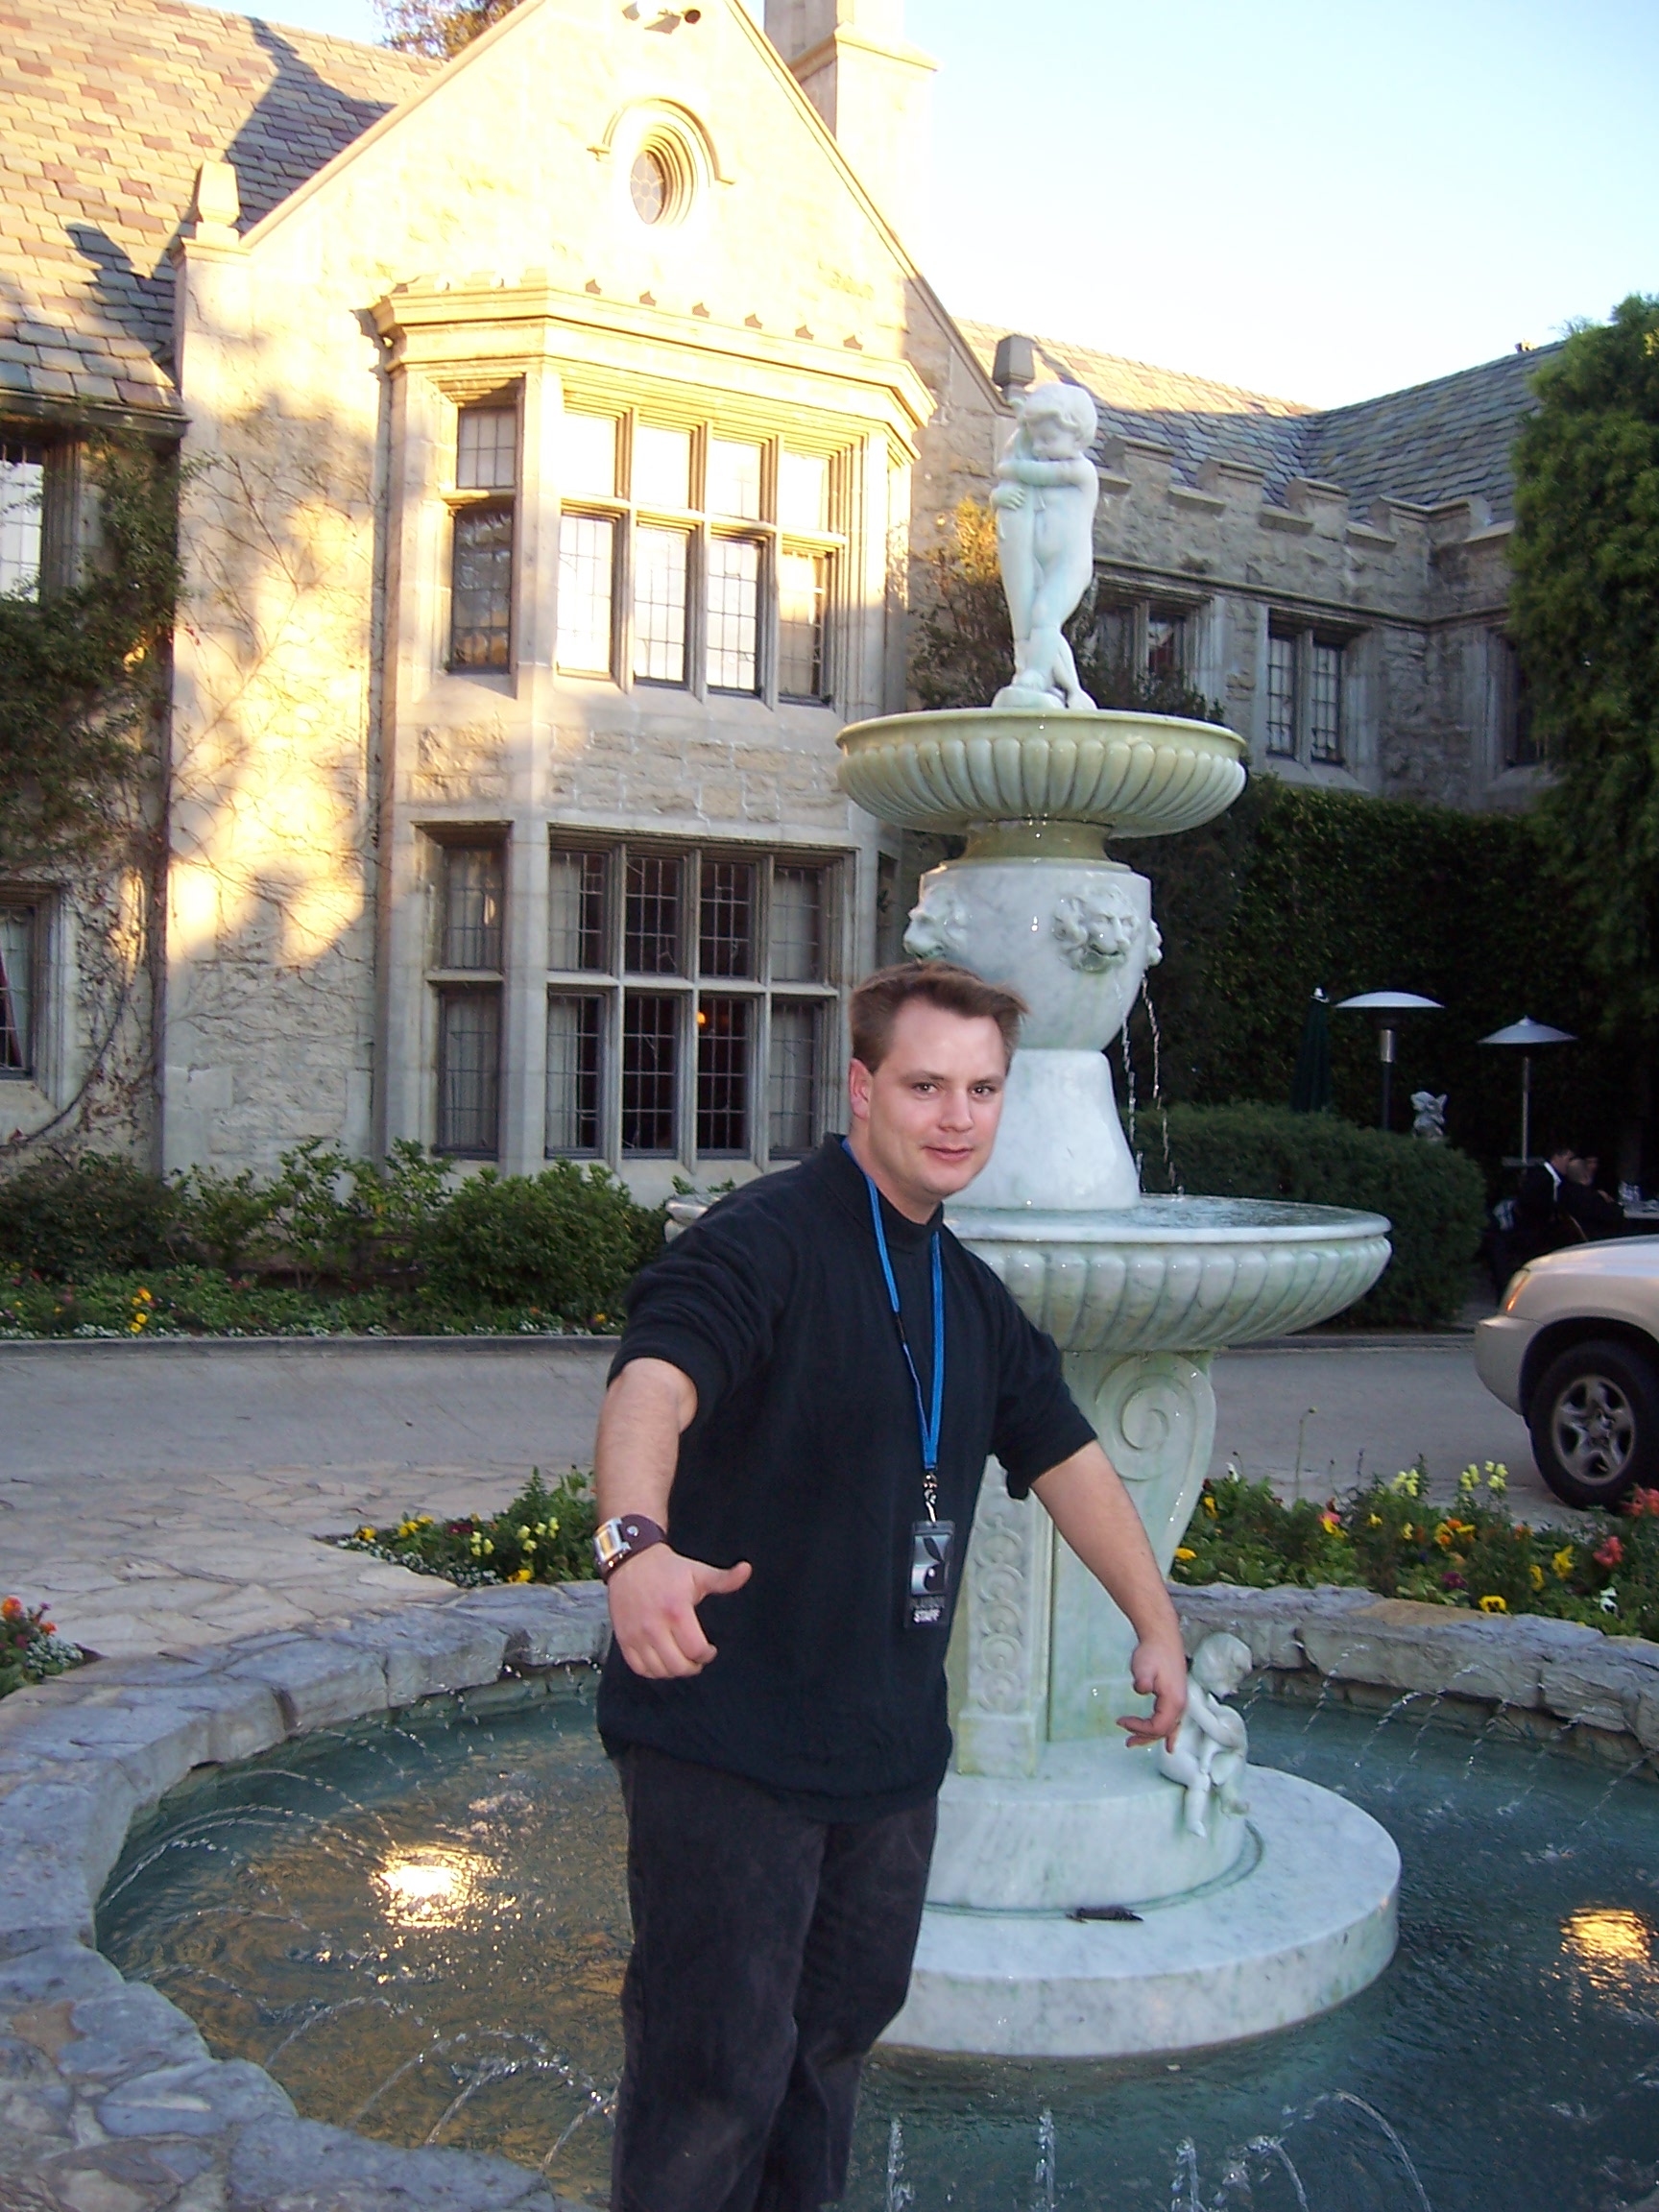 At the Playboy Mansion for a PLAYBOY shoot